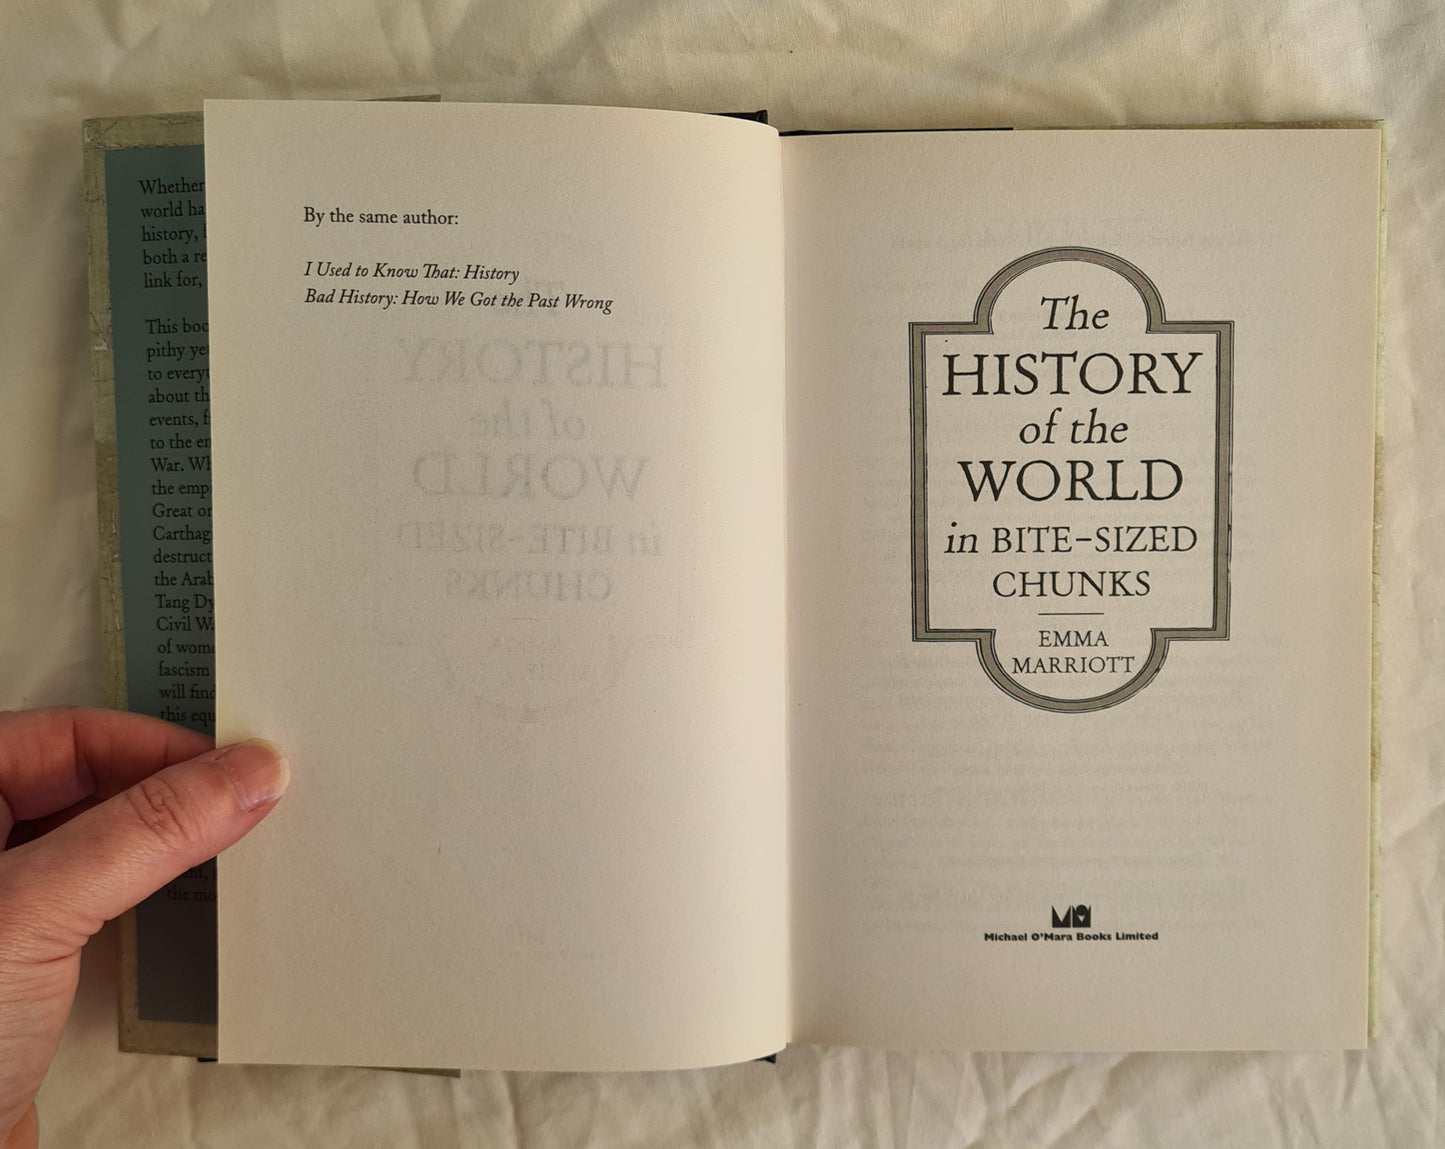 The History of the World by Emma Marriott